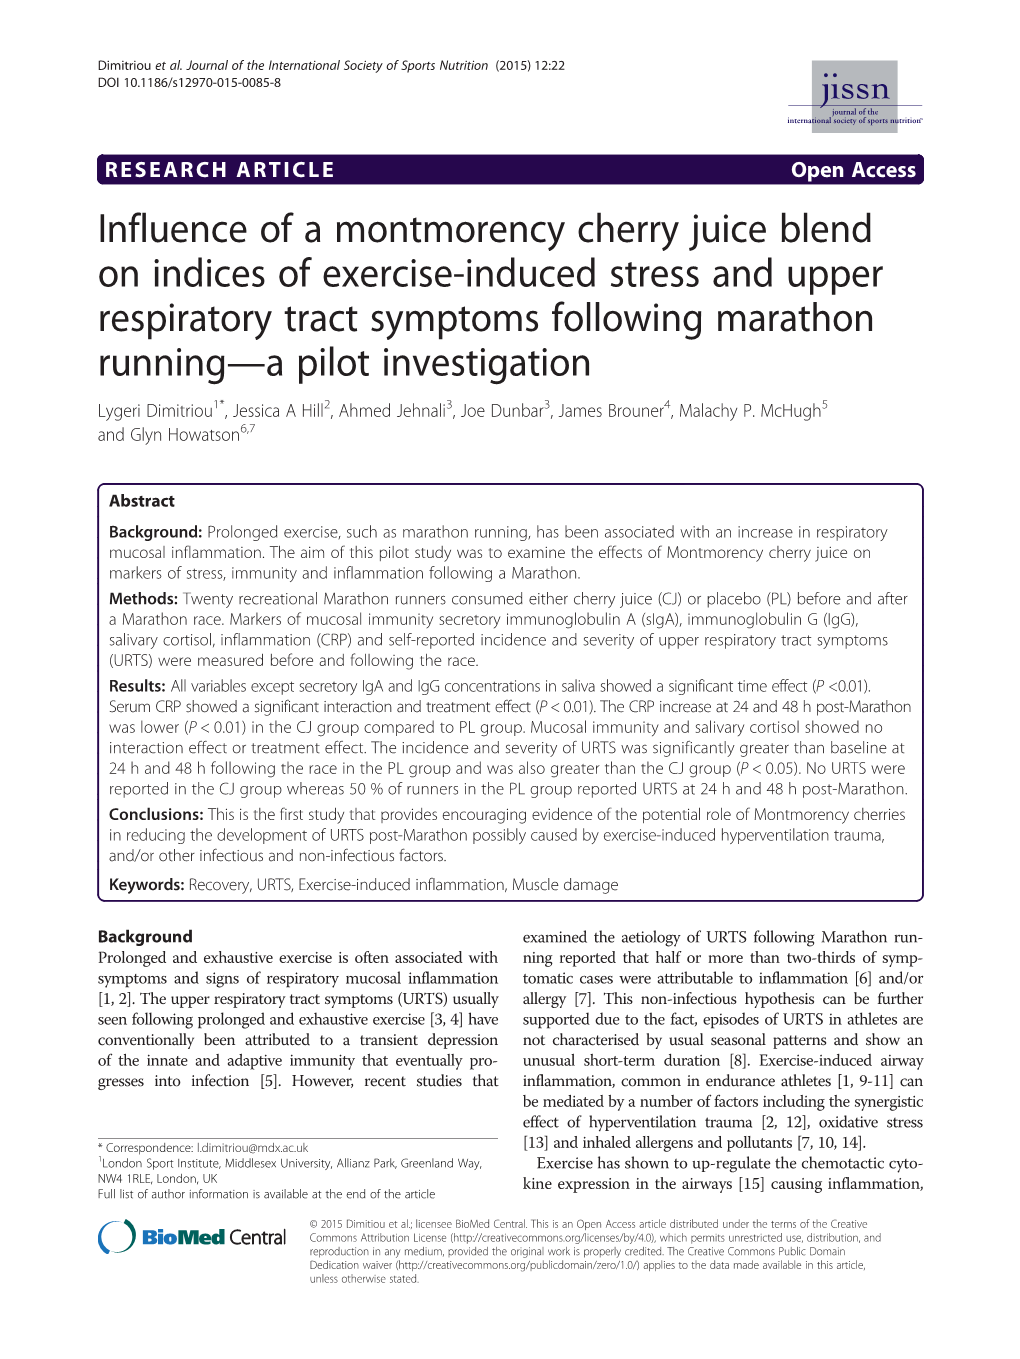 Influence of a Montmorency Cherry Juice Blend on Indices of Exercise